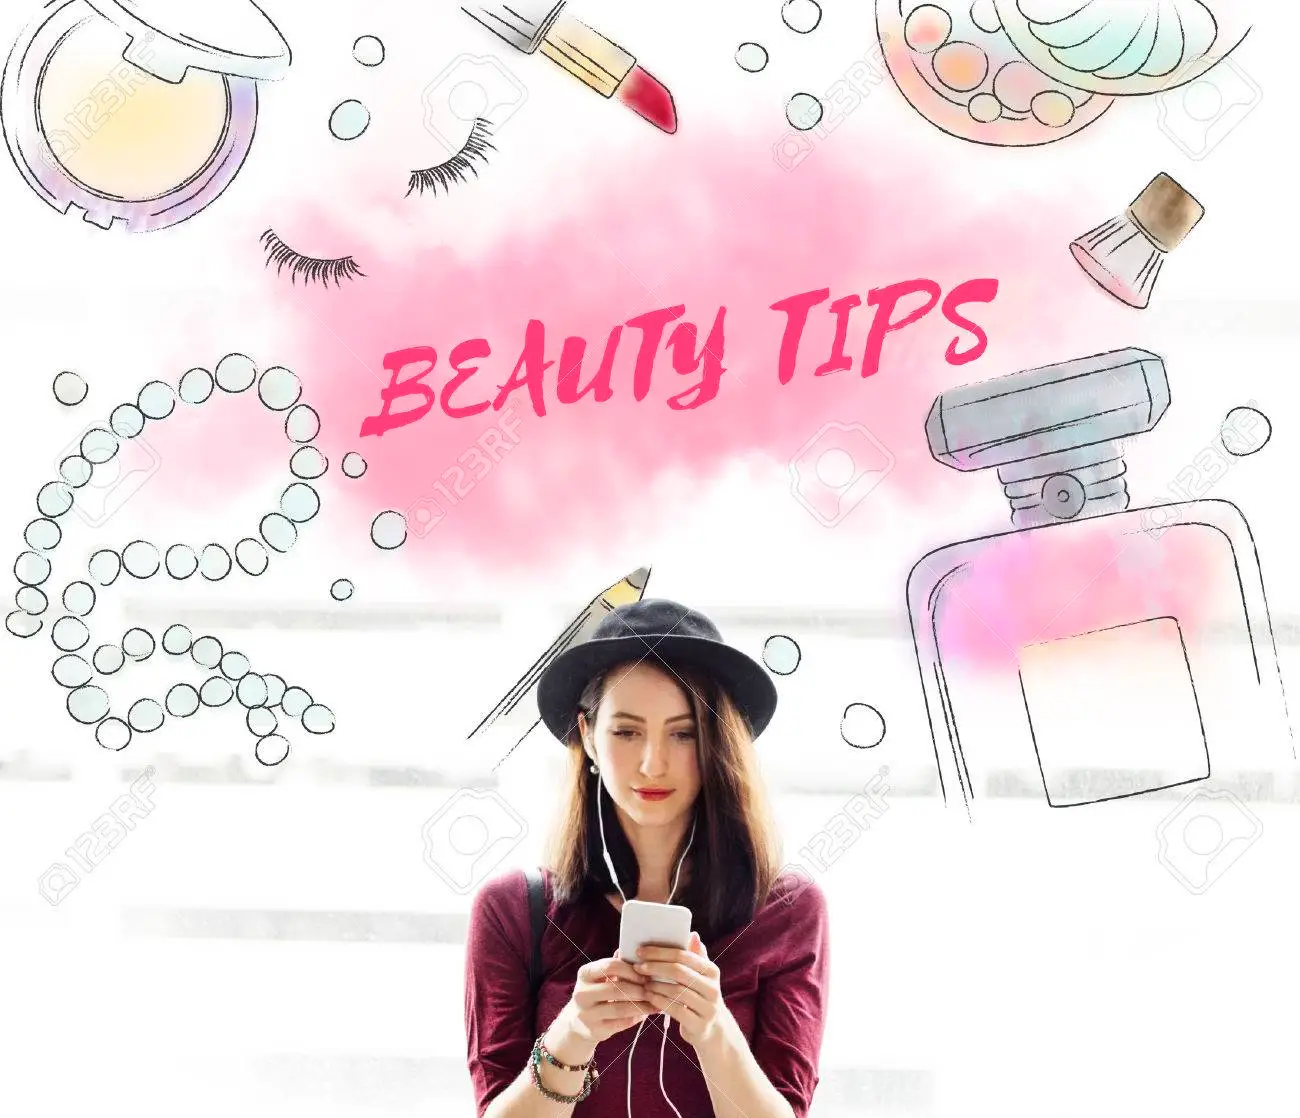 10 Essential Beauty Tips for a Flawless Look